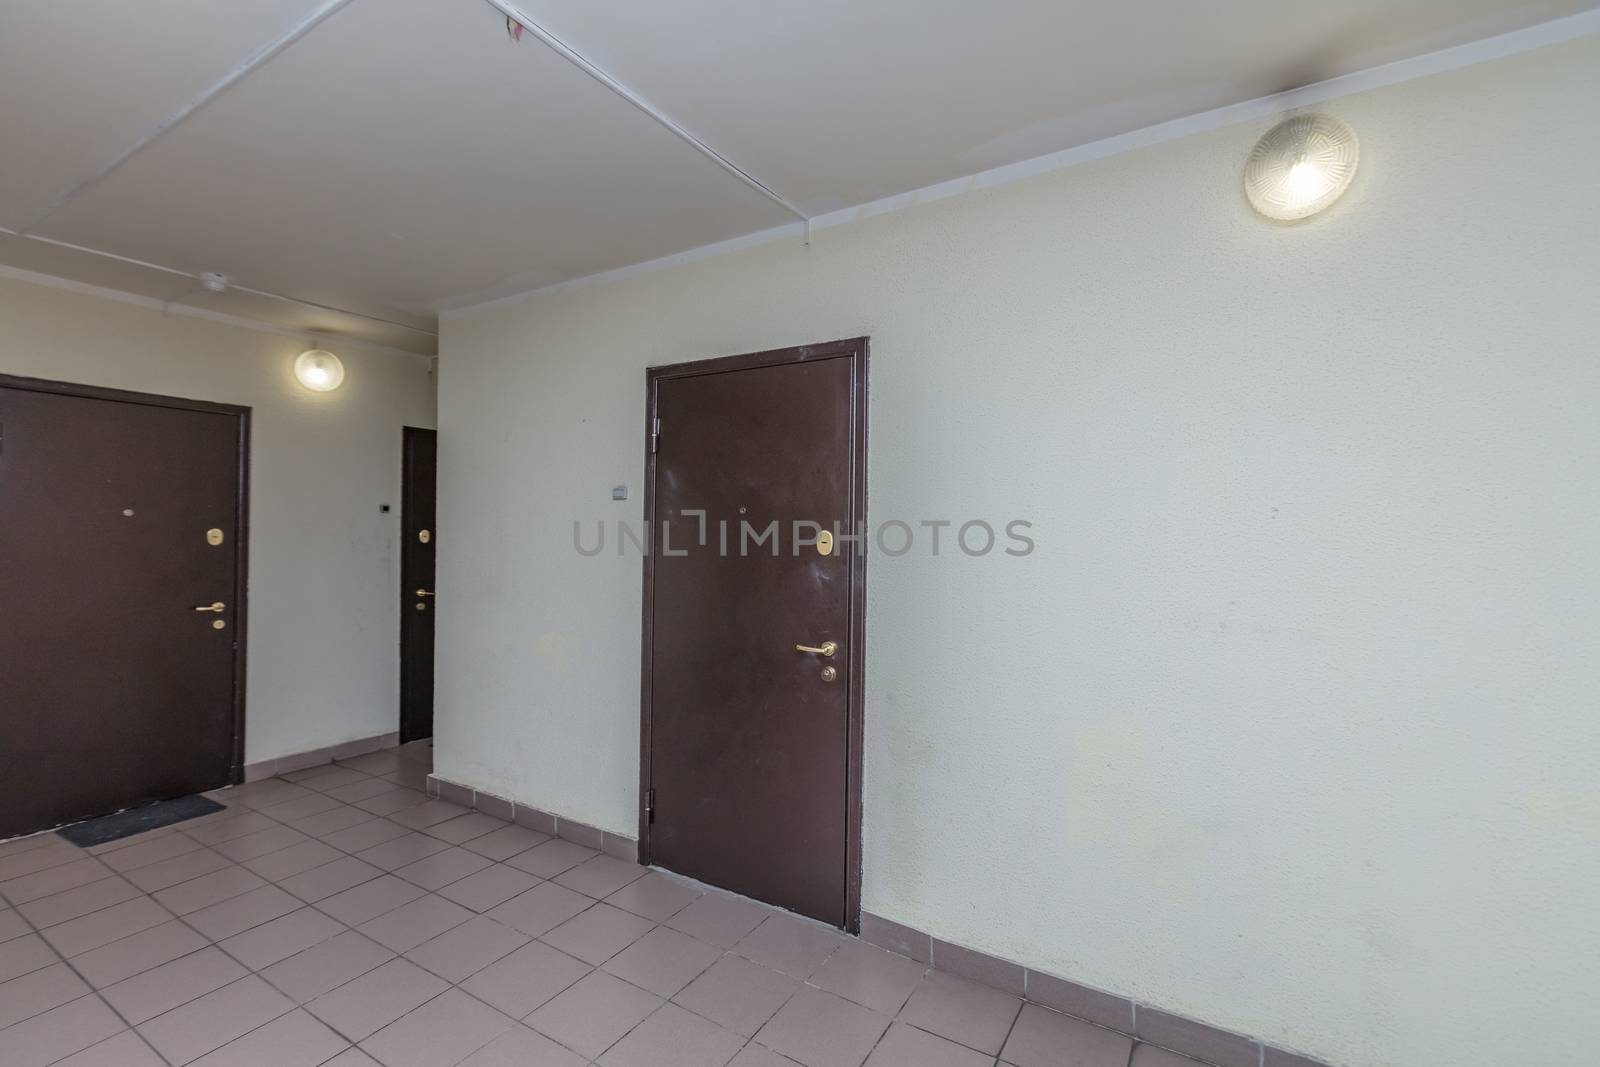 Residential building apartment doors entrance with door bell